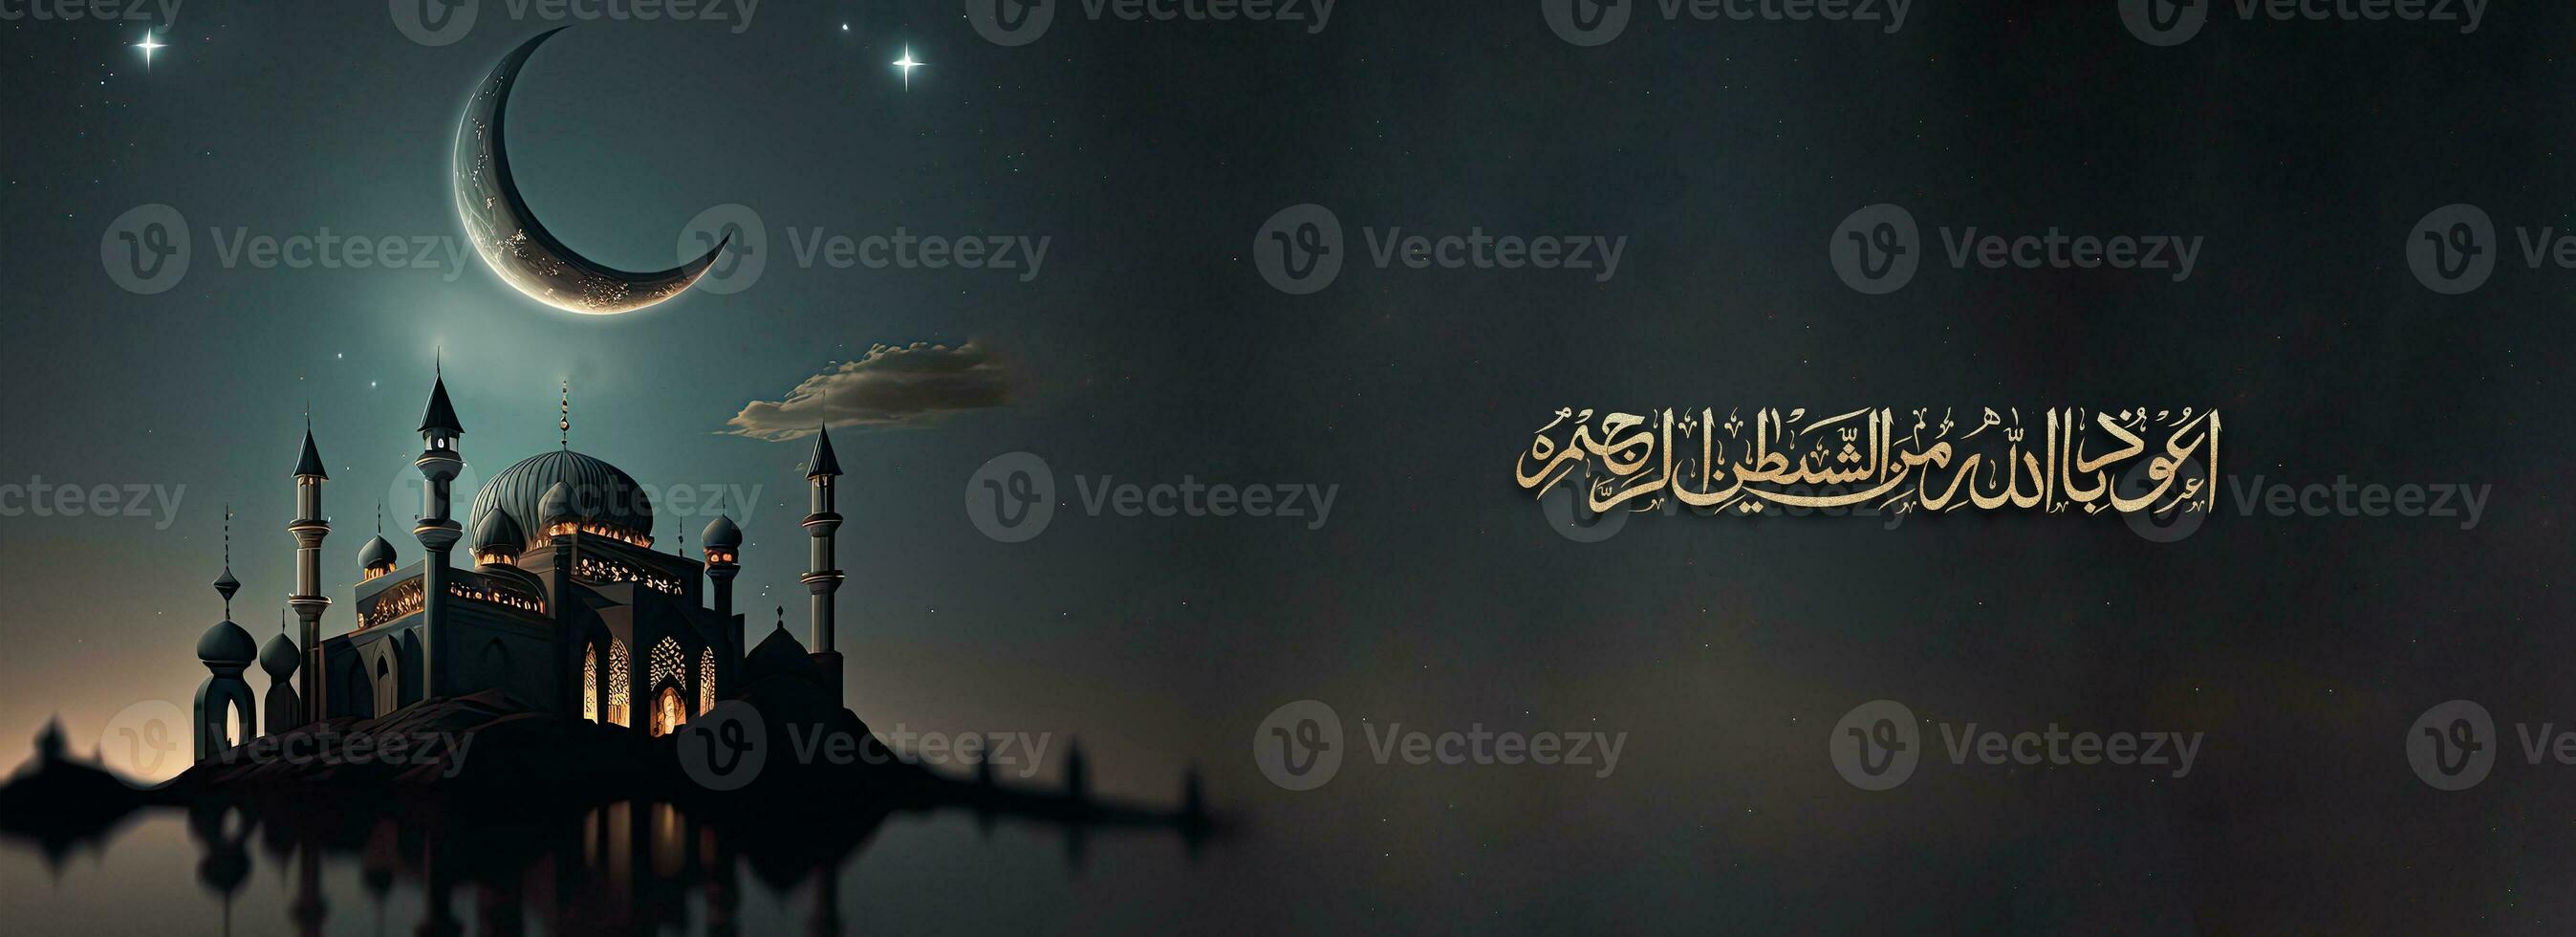 Golden Glittery Arabic Islamic Calligraphy of Wish Fear of Allah brings Intelligence, Honesty and Love And 3D Render of Mosque, Crescent Moon Night Background. photo